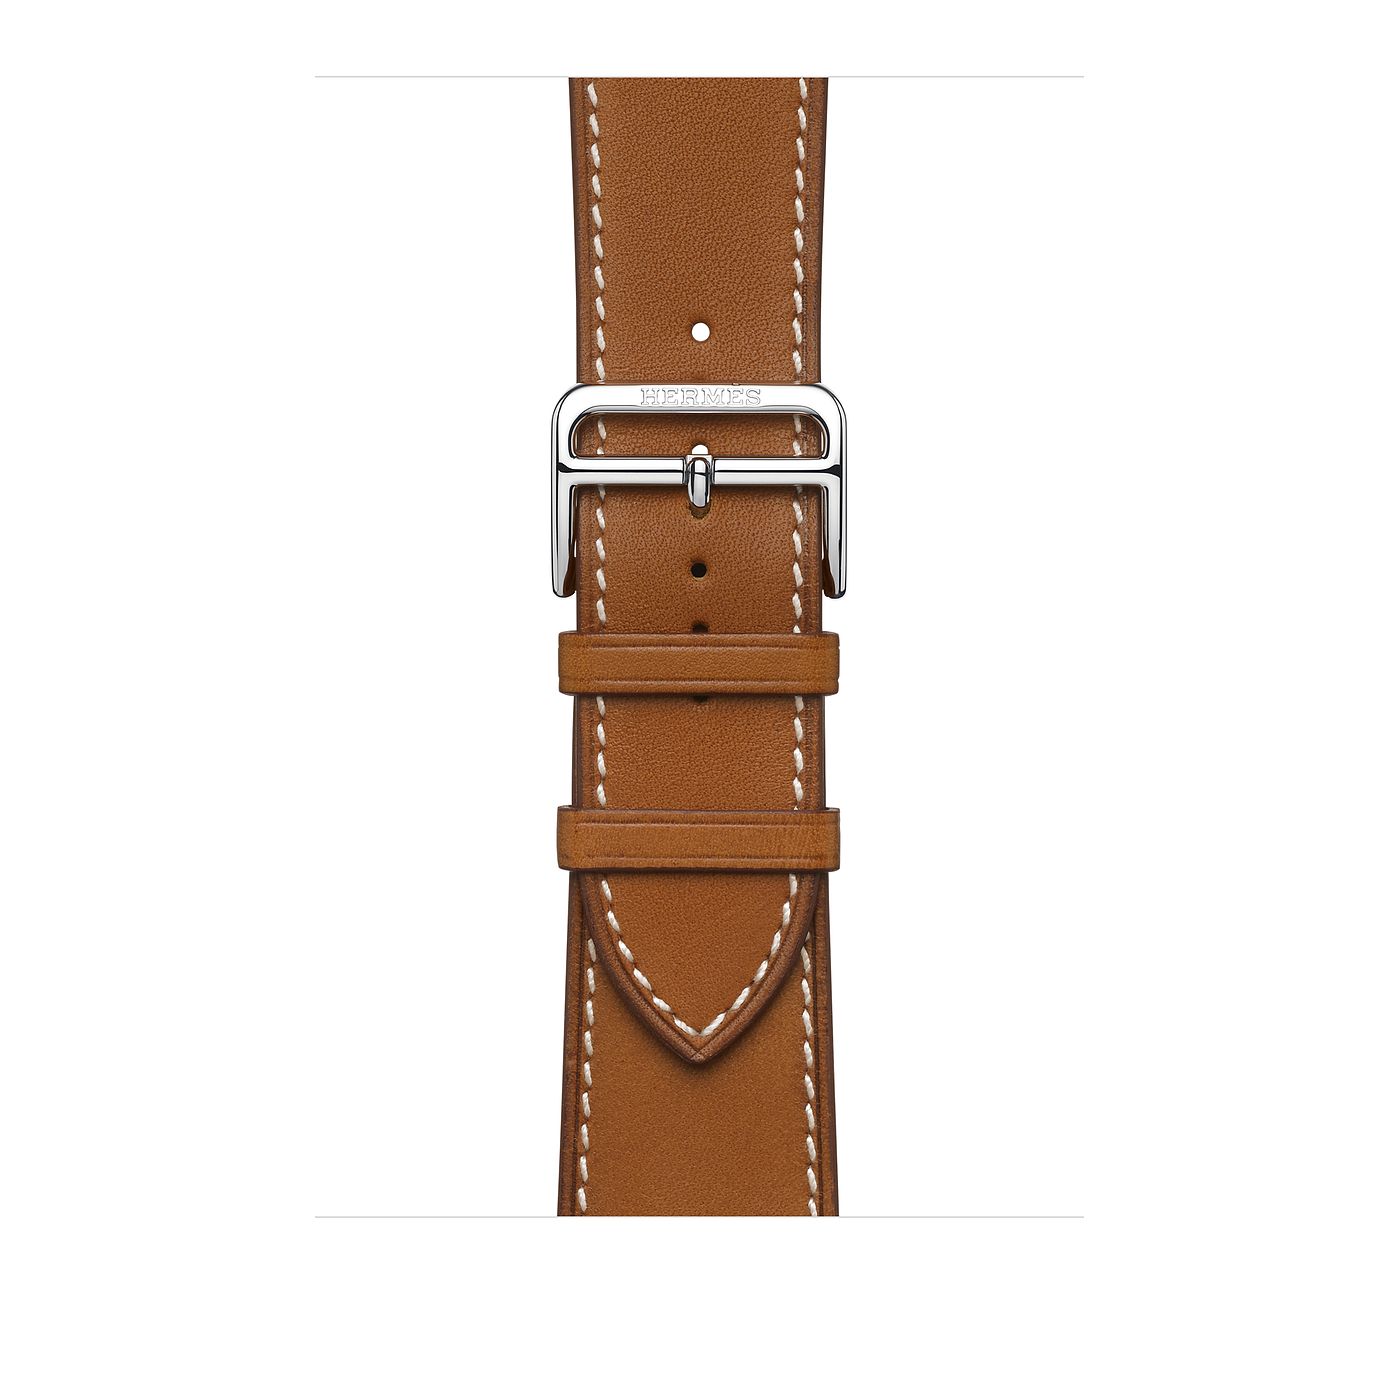 Apple Watch Series 6 Hermès GPS + Cellular, 44mm Silver Stainless Steel Case with Attelage Single Tour